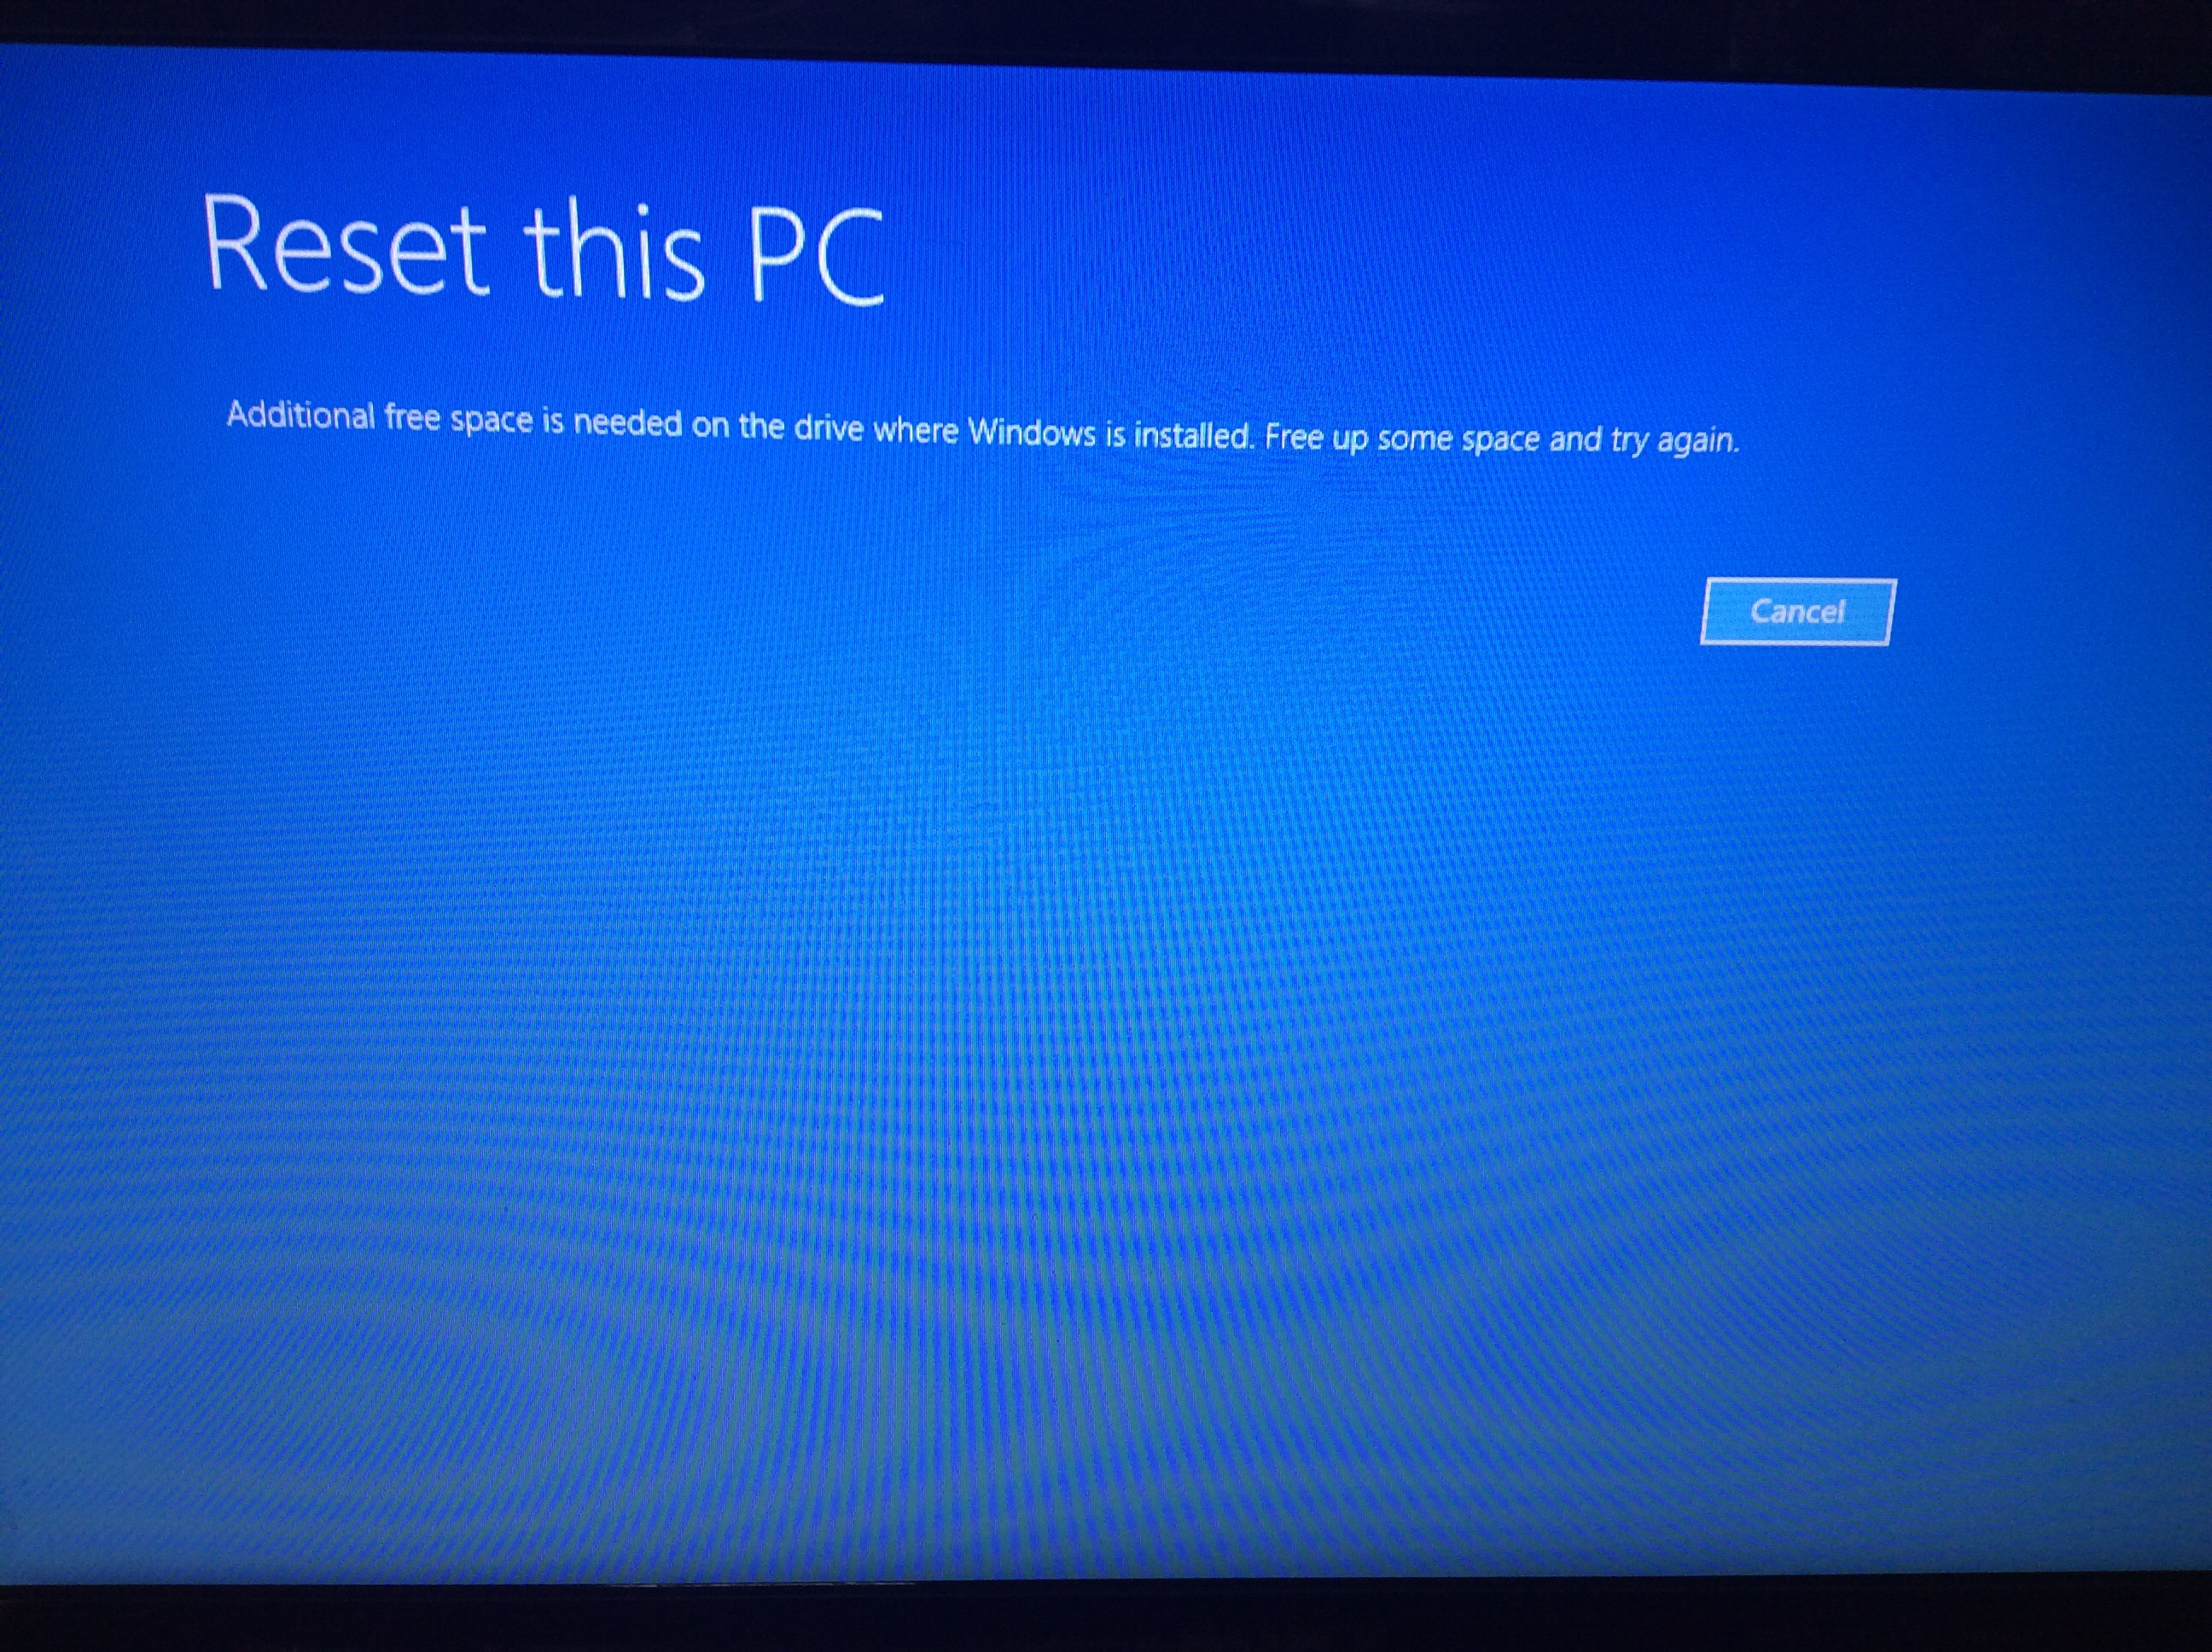 Reset this PC not workingAdditional free space is needed on the